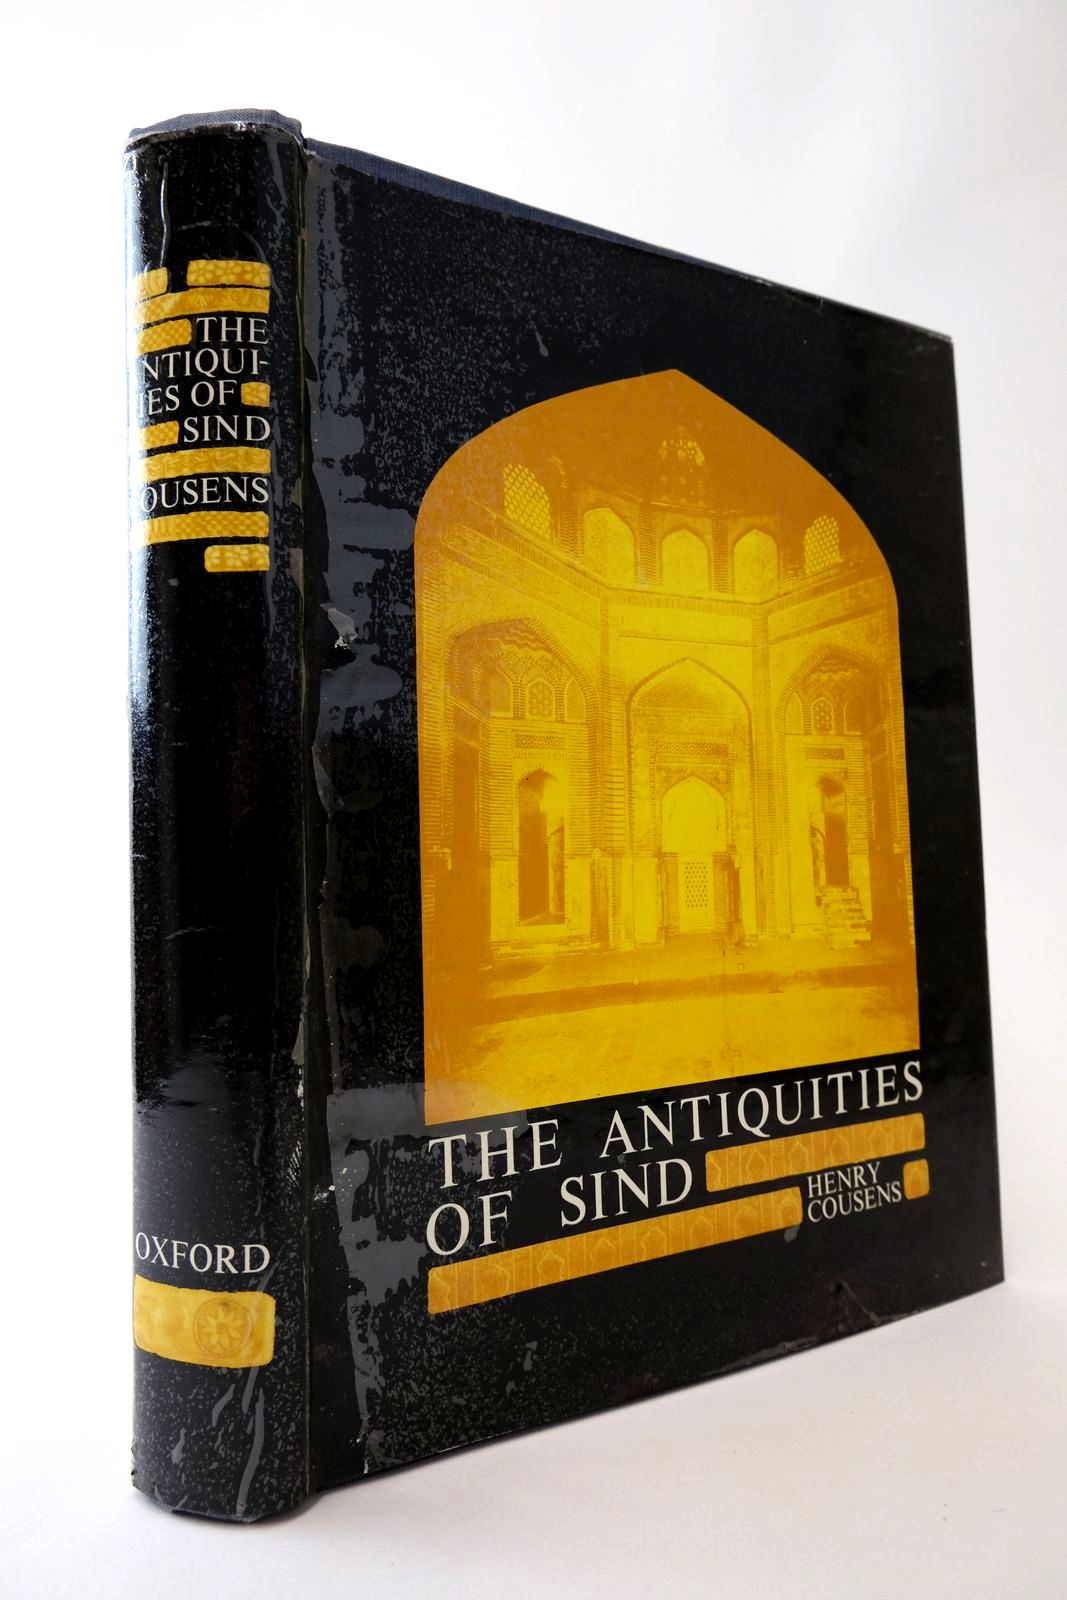 Photo of THE ANTIQUITIES OF SIND written by Cousens, Henry published by Oxford University Press (STOCK CODE: 2132536)  for sale by Stella & Rose's Books